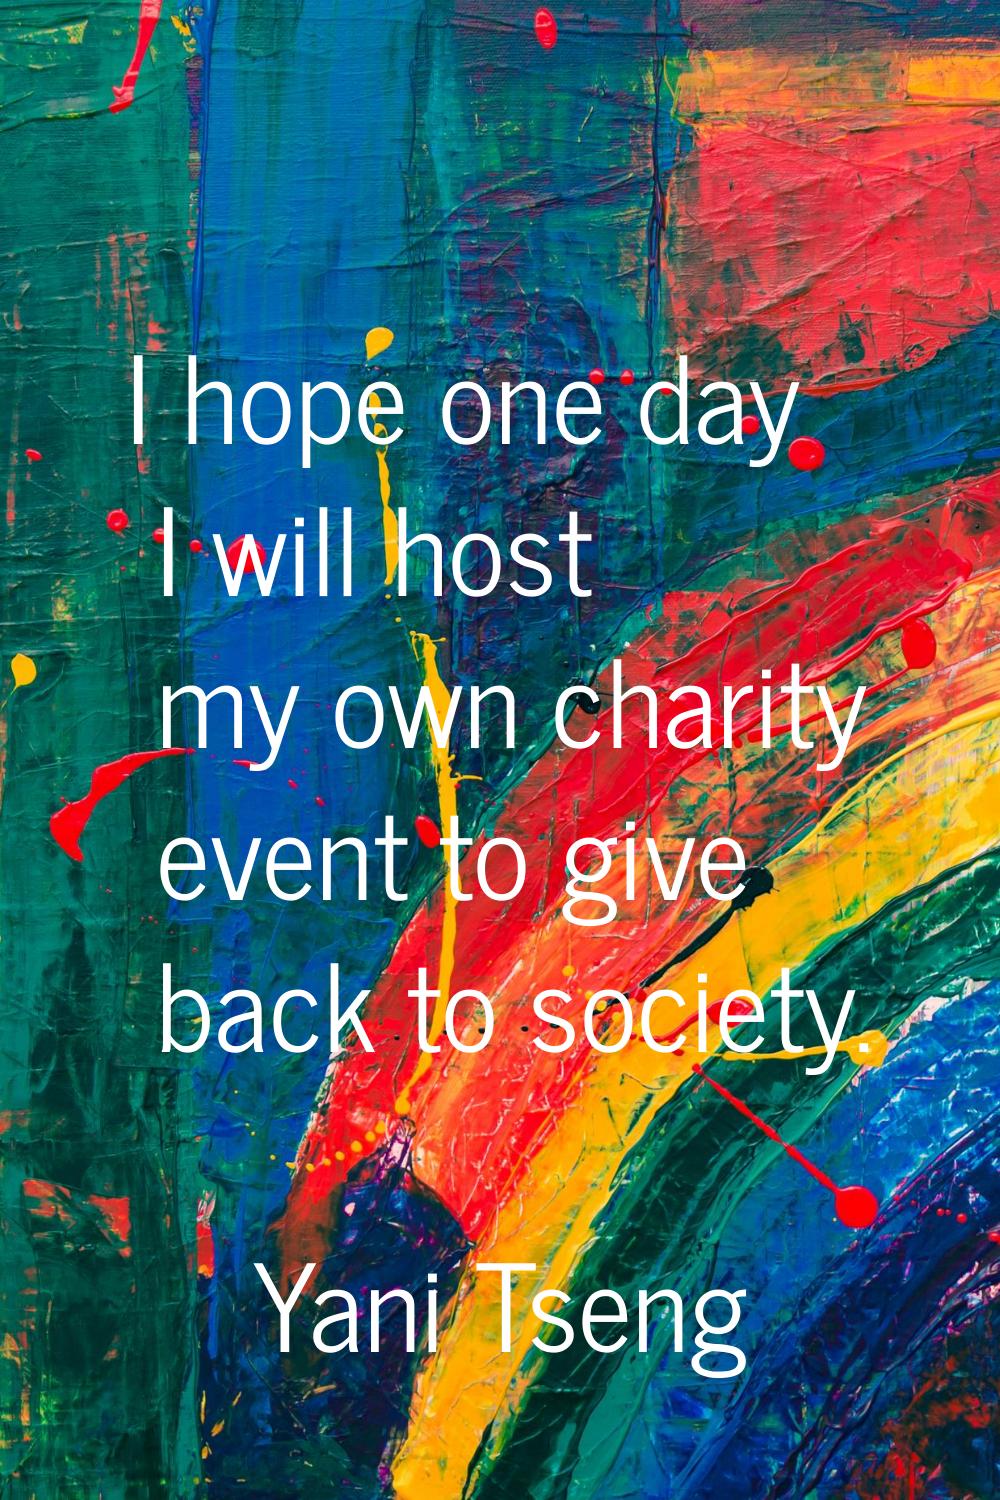 I hope one day I will host my own charity event to give back to society.